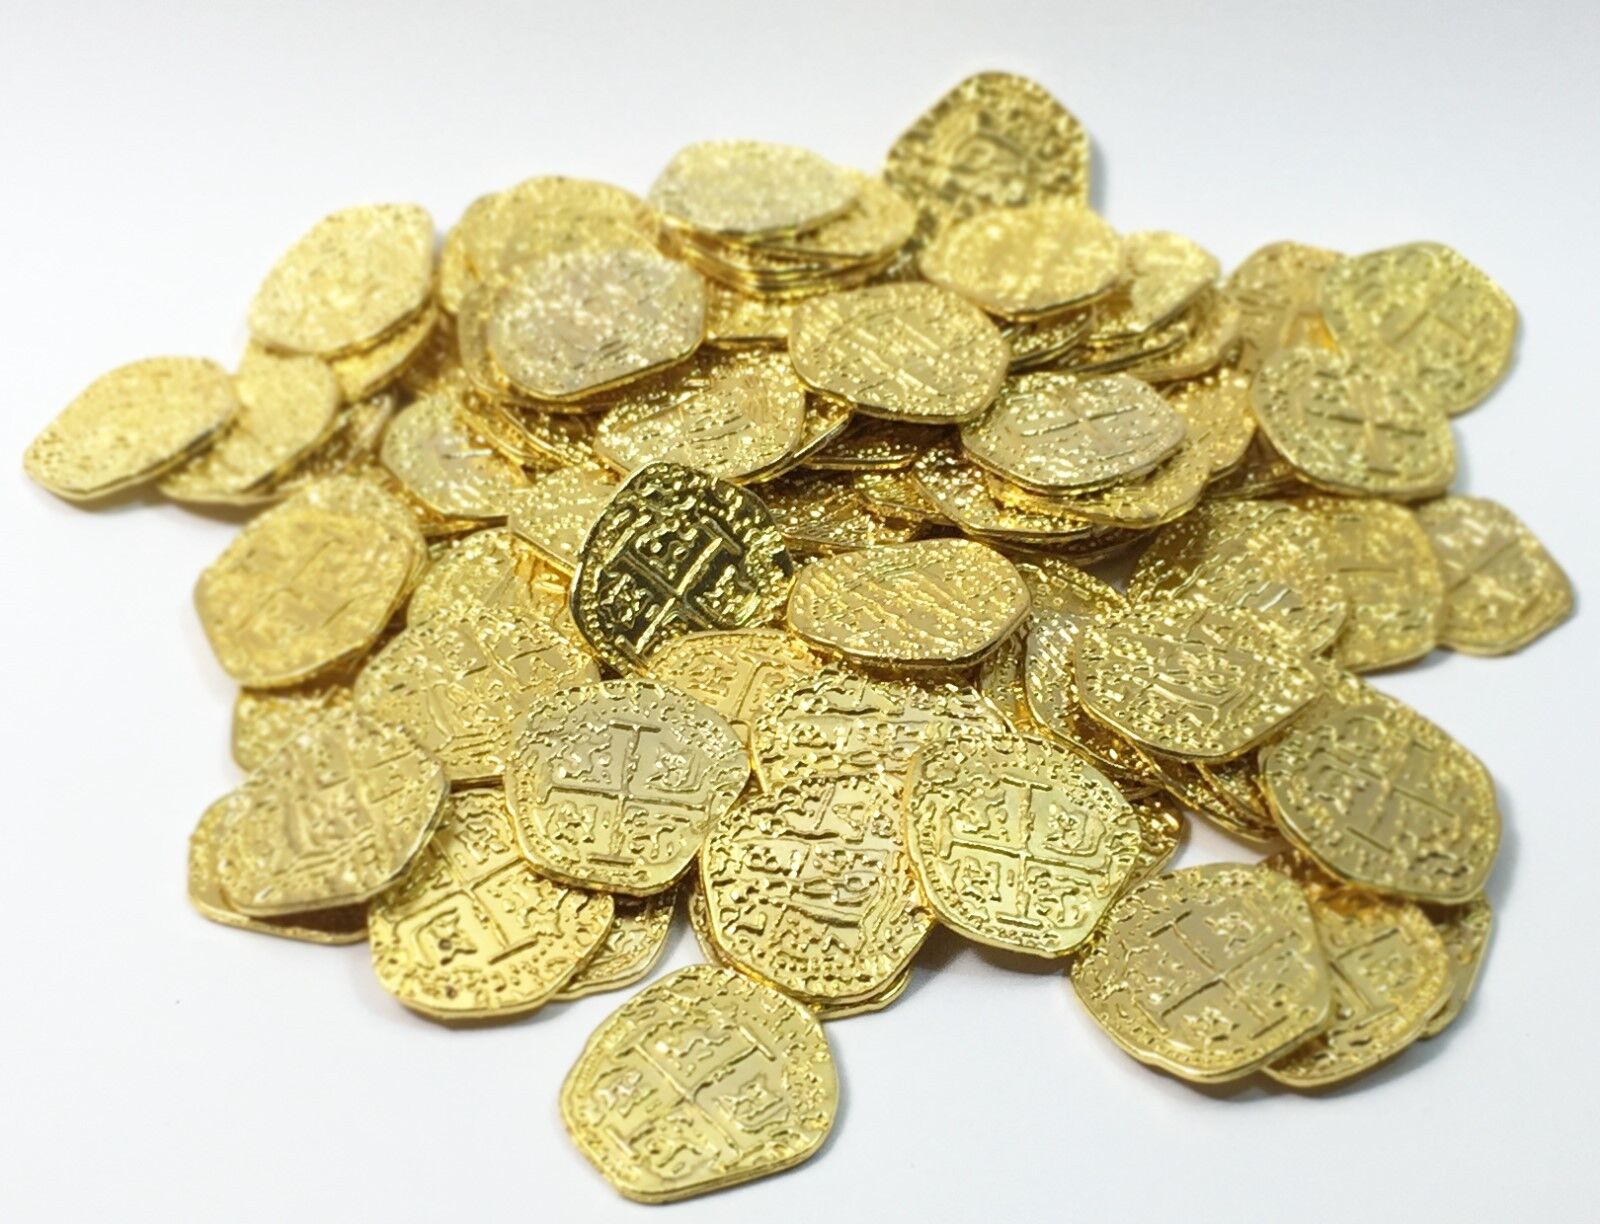 Pirate Treasure Coins - 10 Metal Gold Colored Doubloon Props